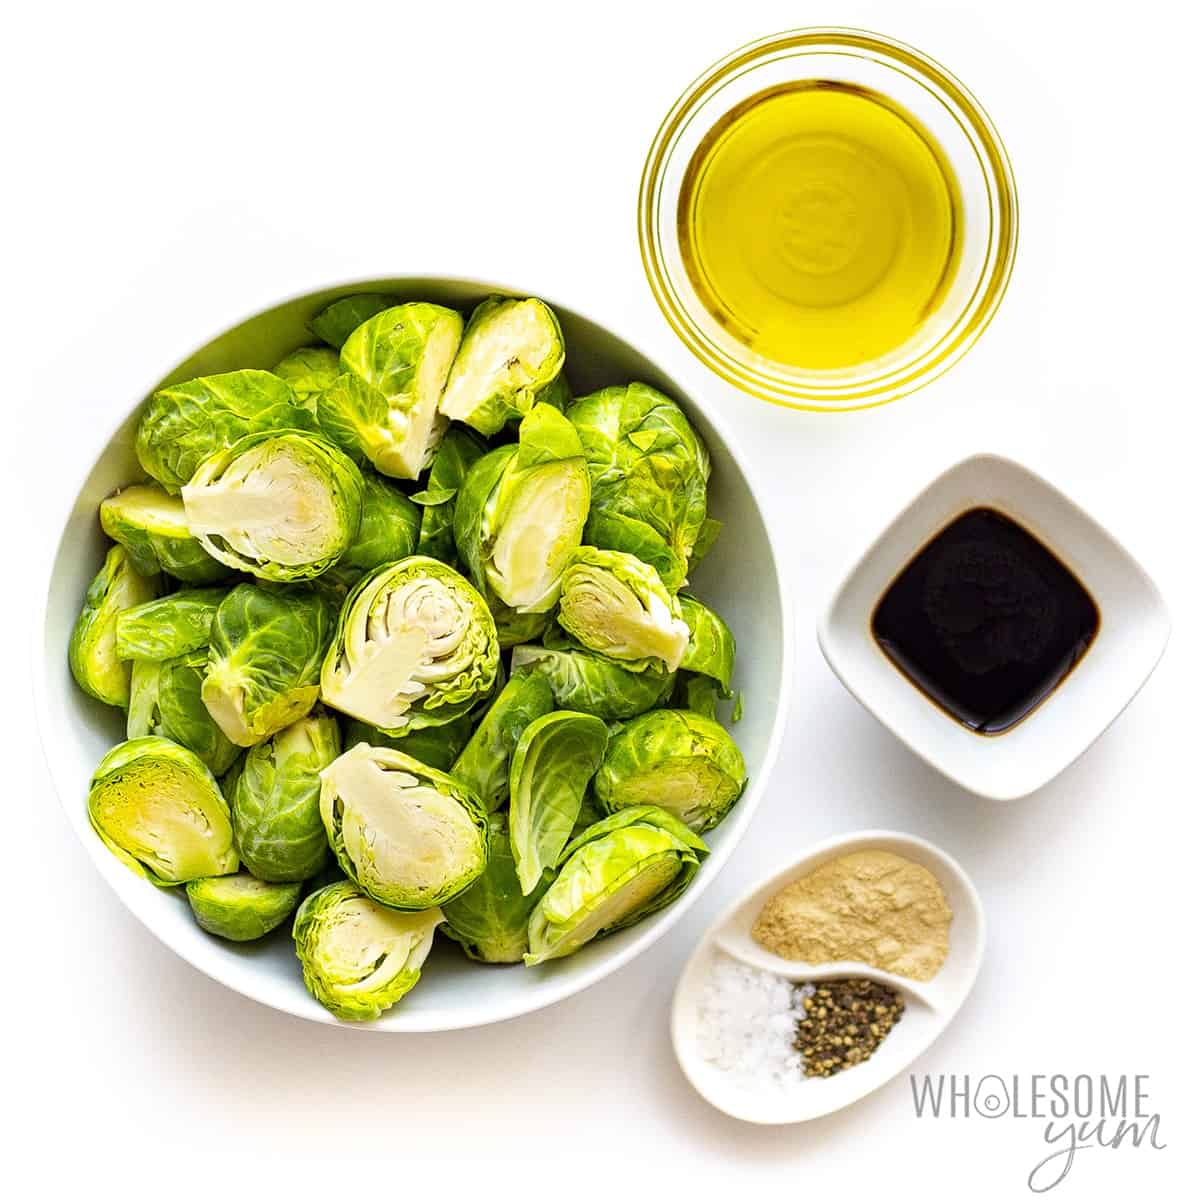 Ingredients to make brussels sprouts in the air fryer